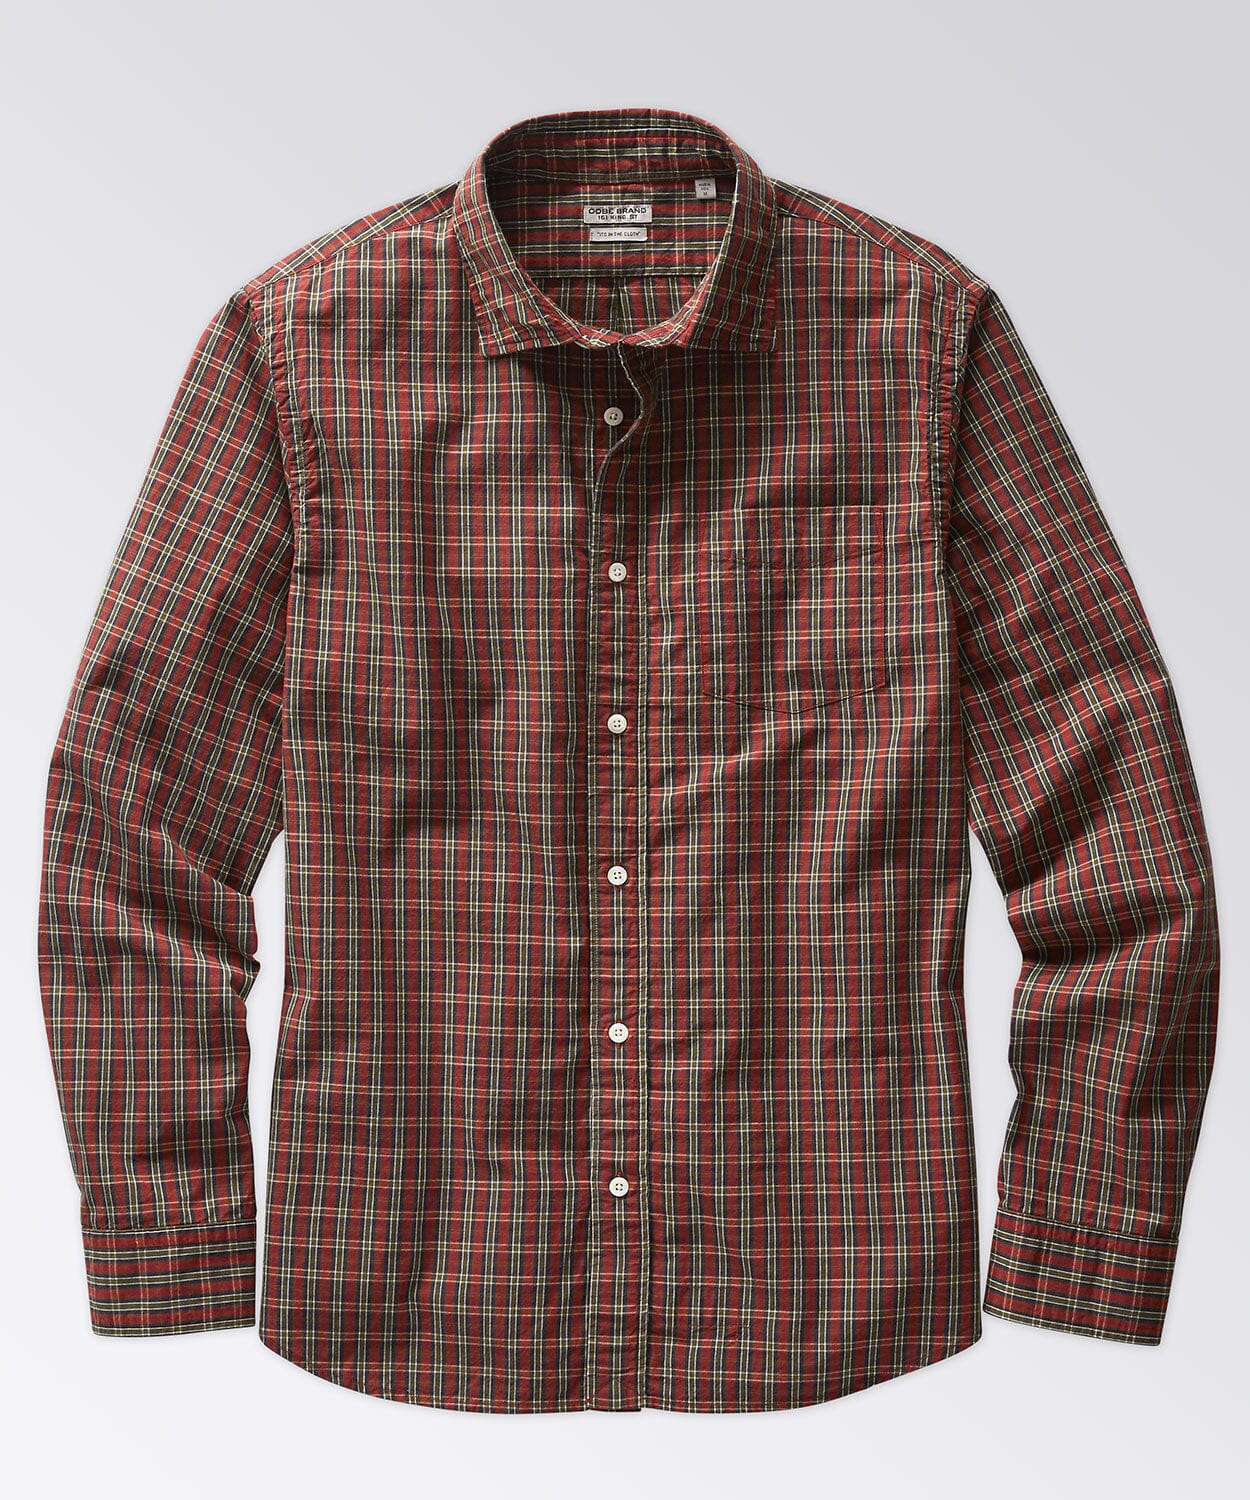 Excella Plaid Shirt Button Downs OOBE BRAND Red Green S 